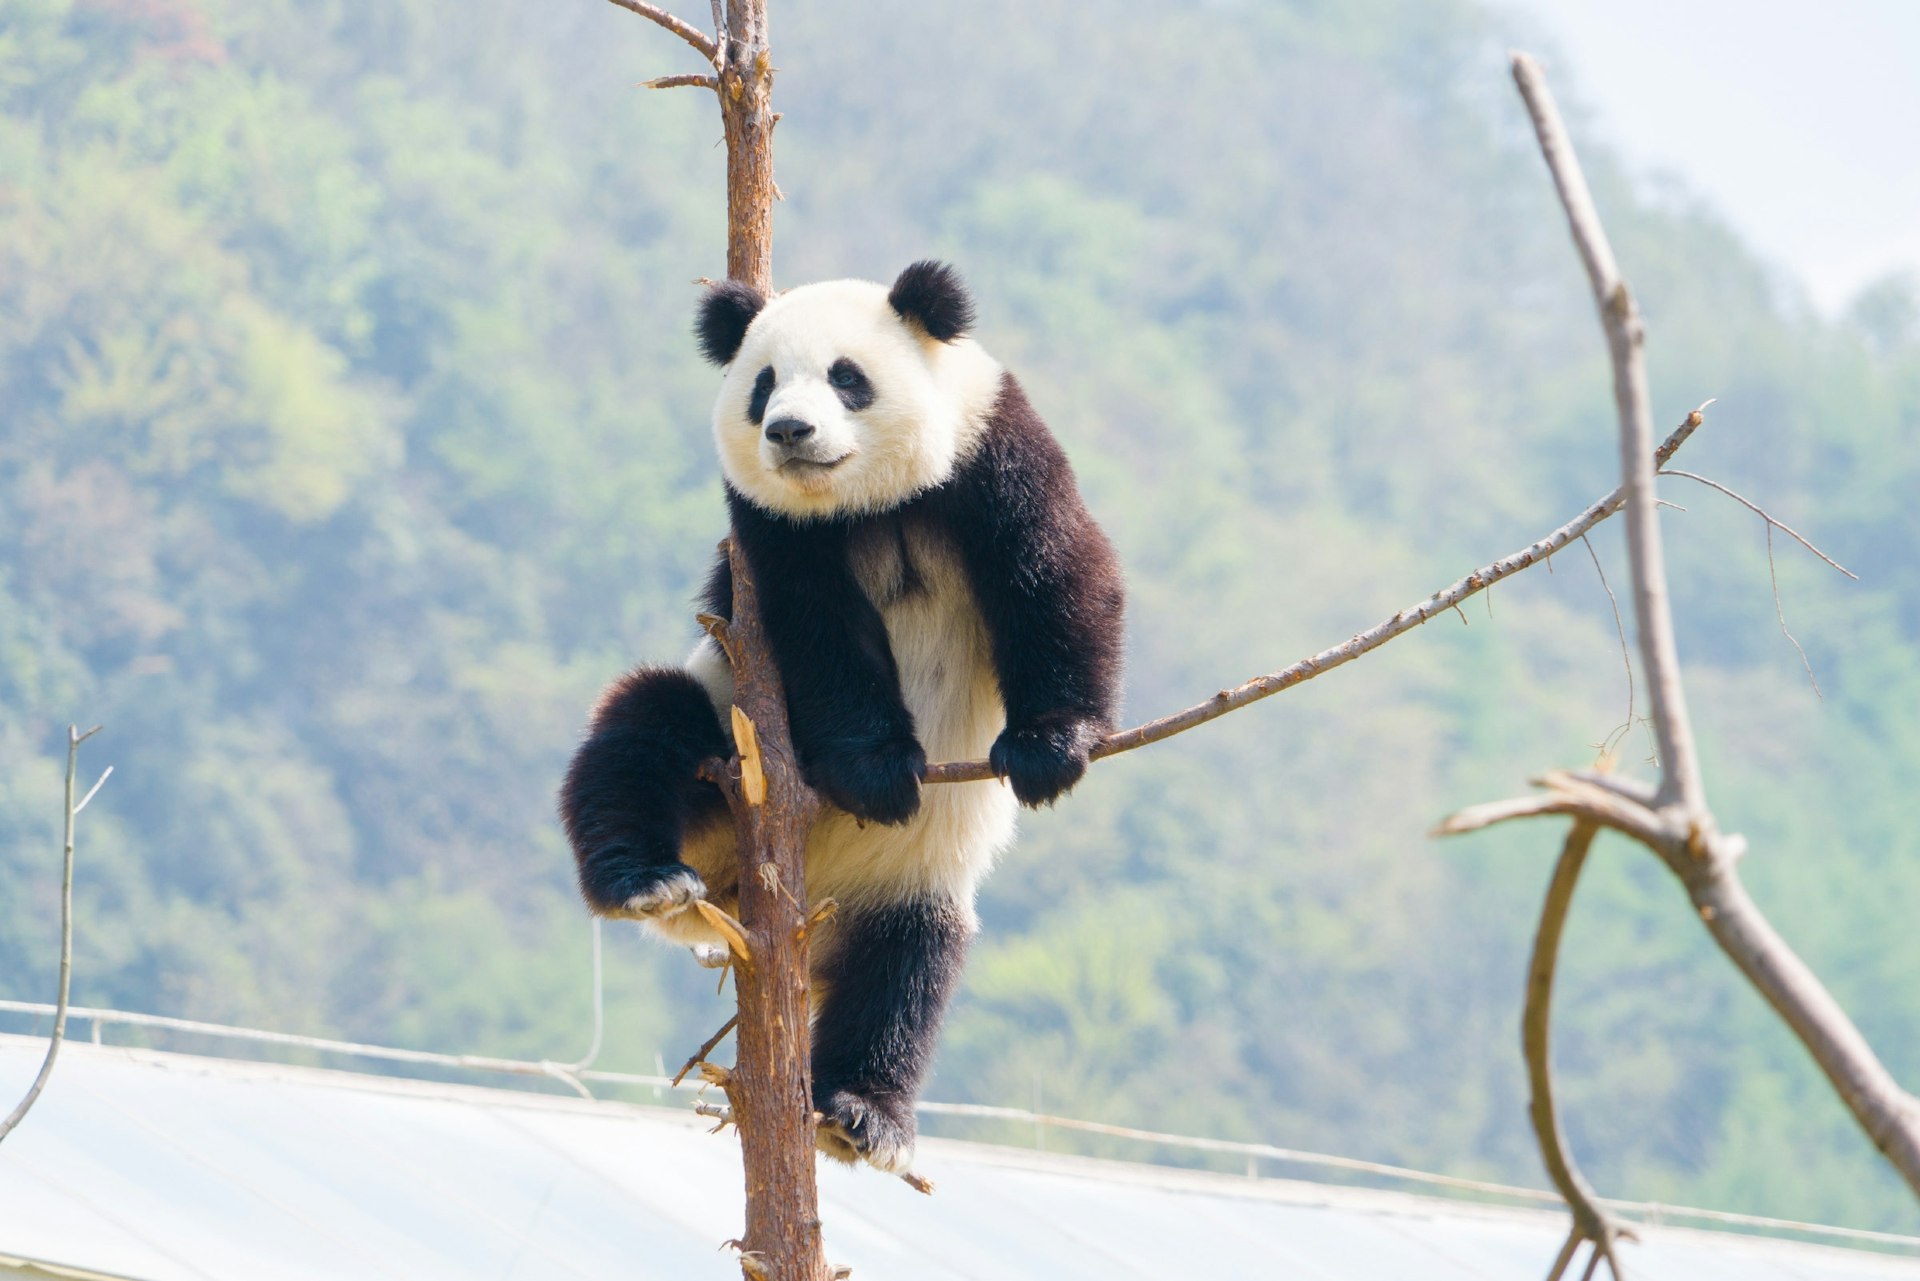 A panda climbs up on a bare tree that has had most of its branches broken off. There are green trees visible in the background, out of focus. 